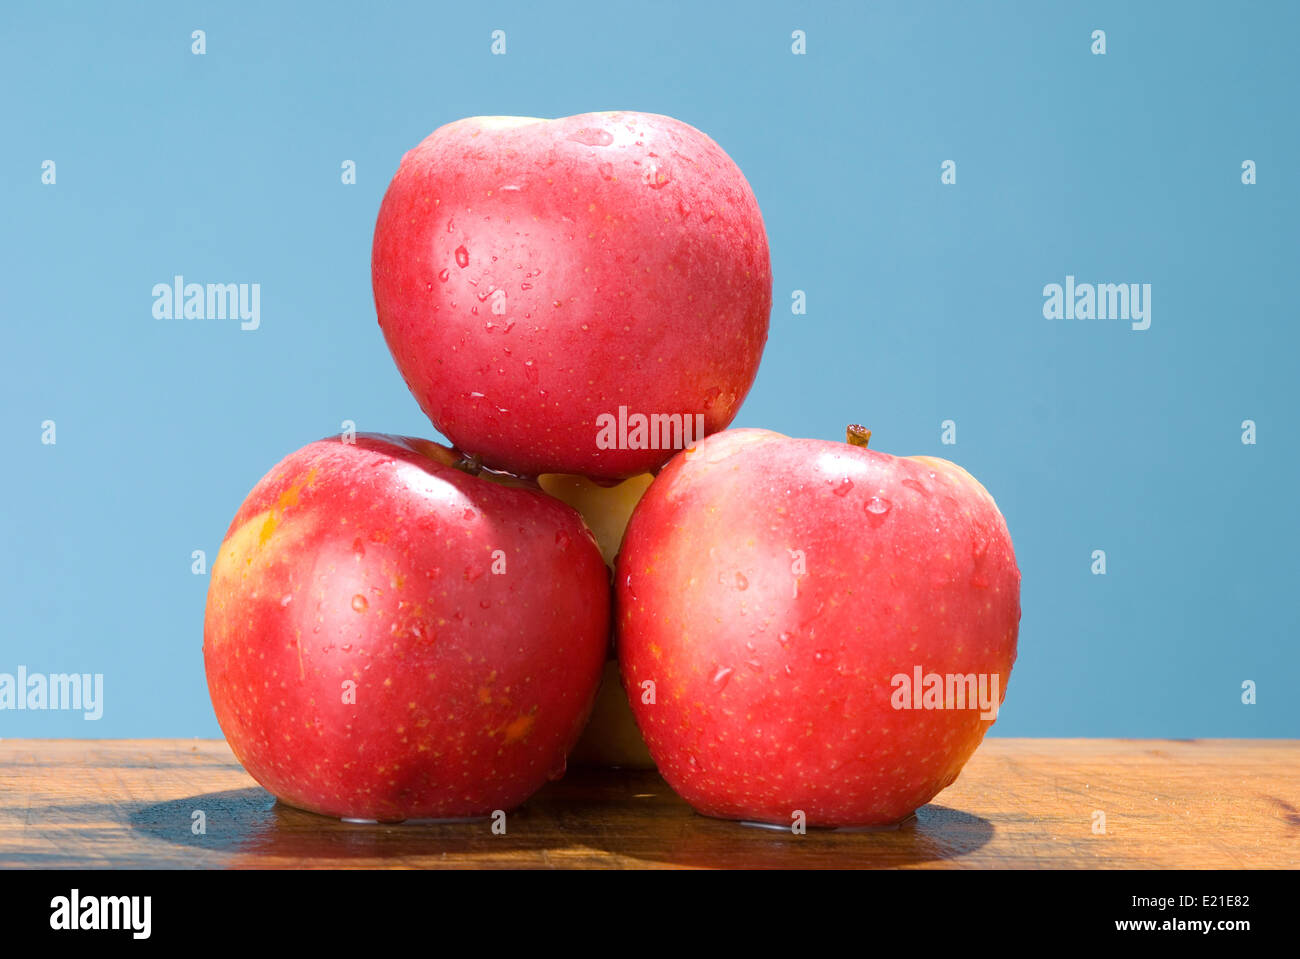 apples with rose color Stock Photo